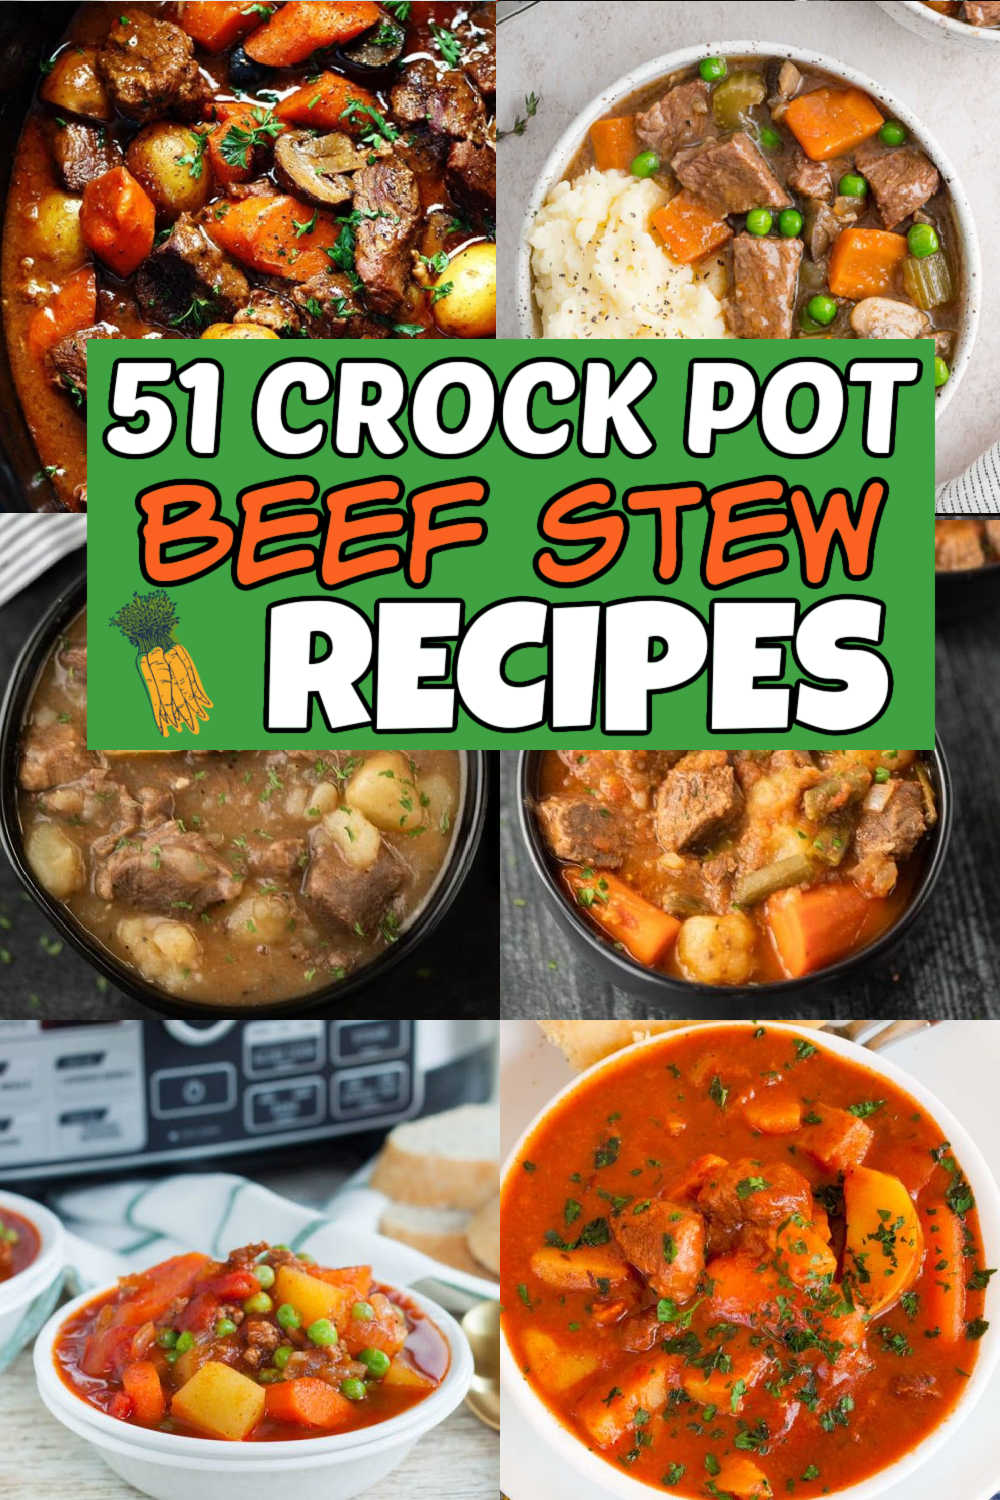 Get ready to tantalize your taste buds and warm your soul with the ultimate comfort food, crockpot beef stew recipes. From tender chunks of beef to hearty veggies, these slow-cooked wonders bring out the flavors like nothing else. #eatingonadime #crockpotbeefstewrecipes #beefstewrecipes